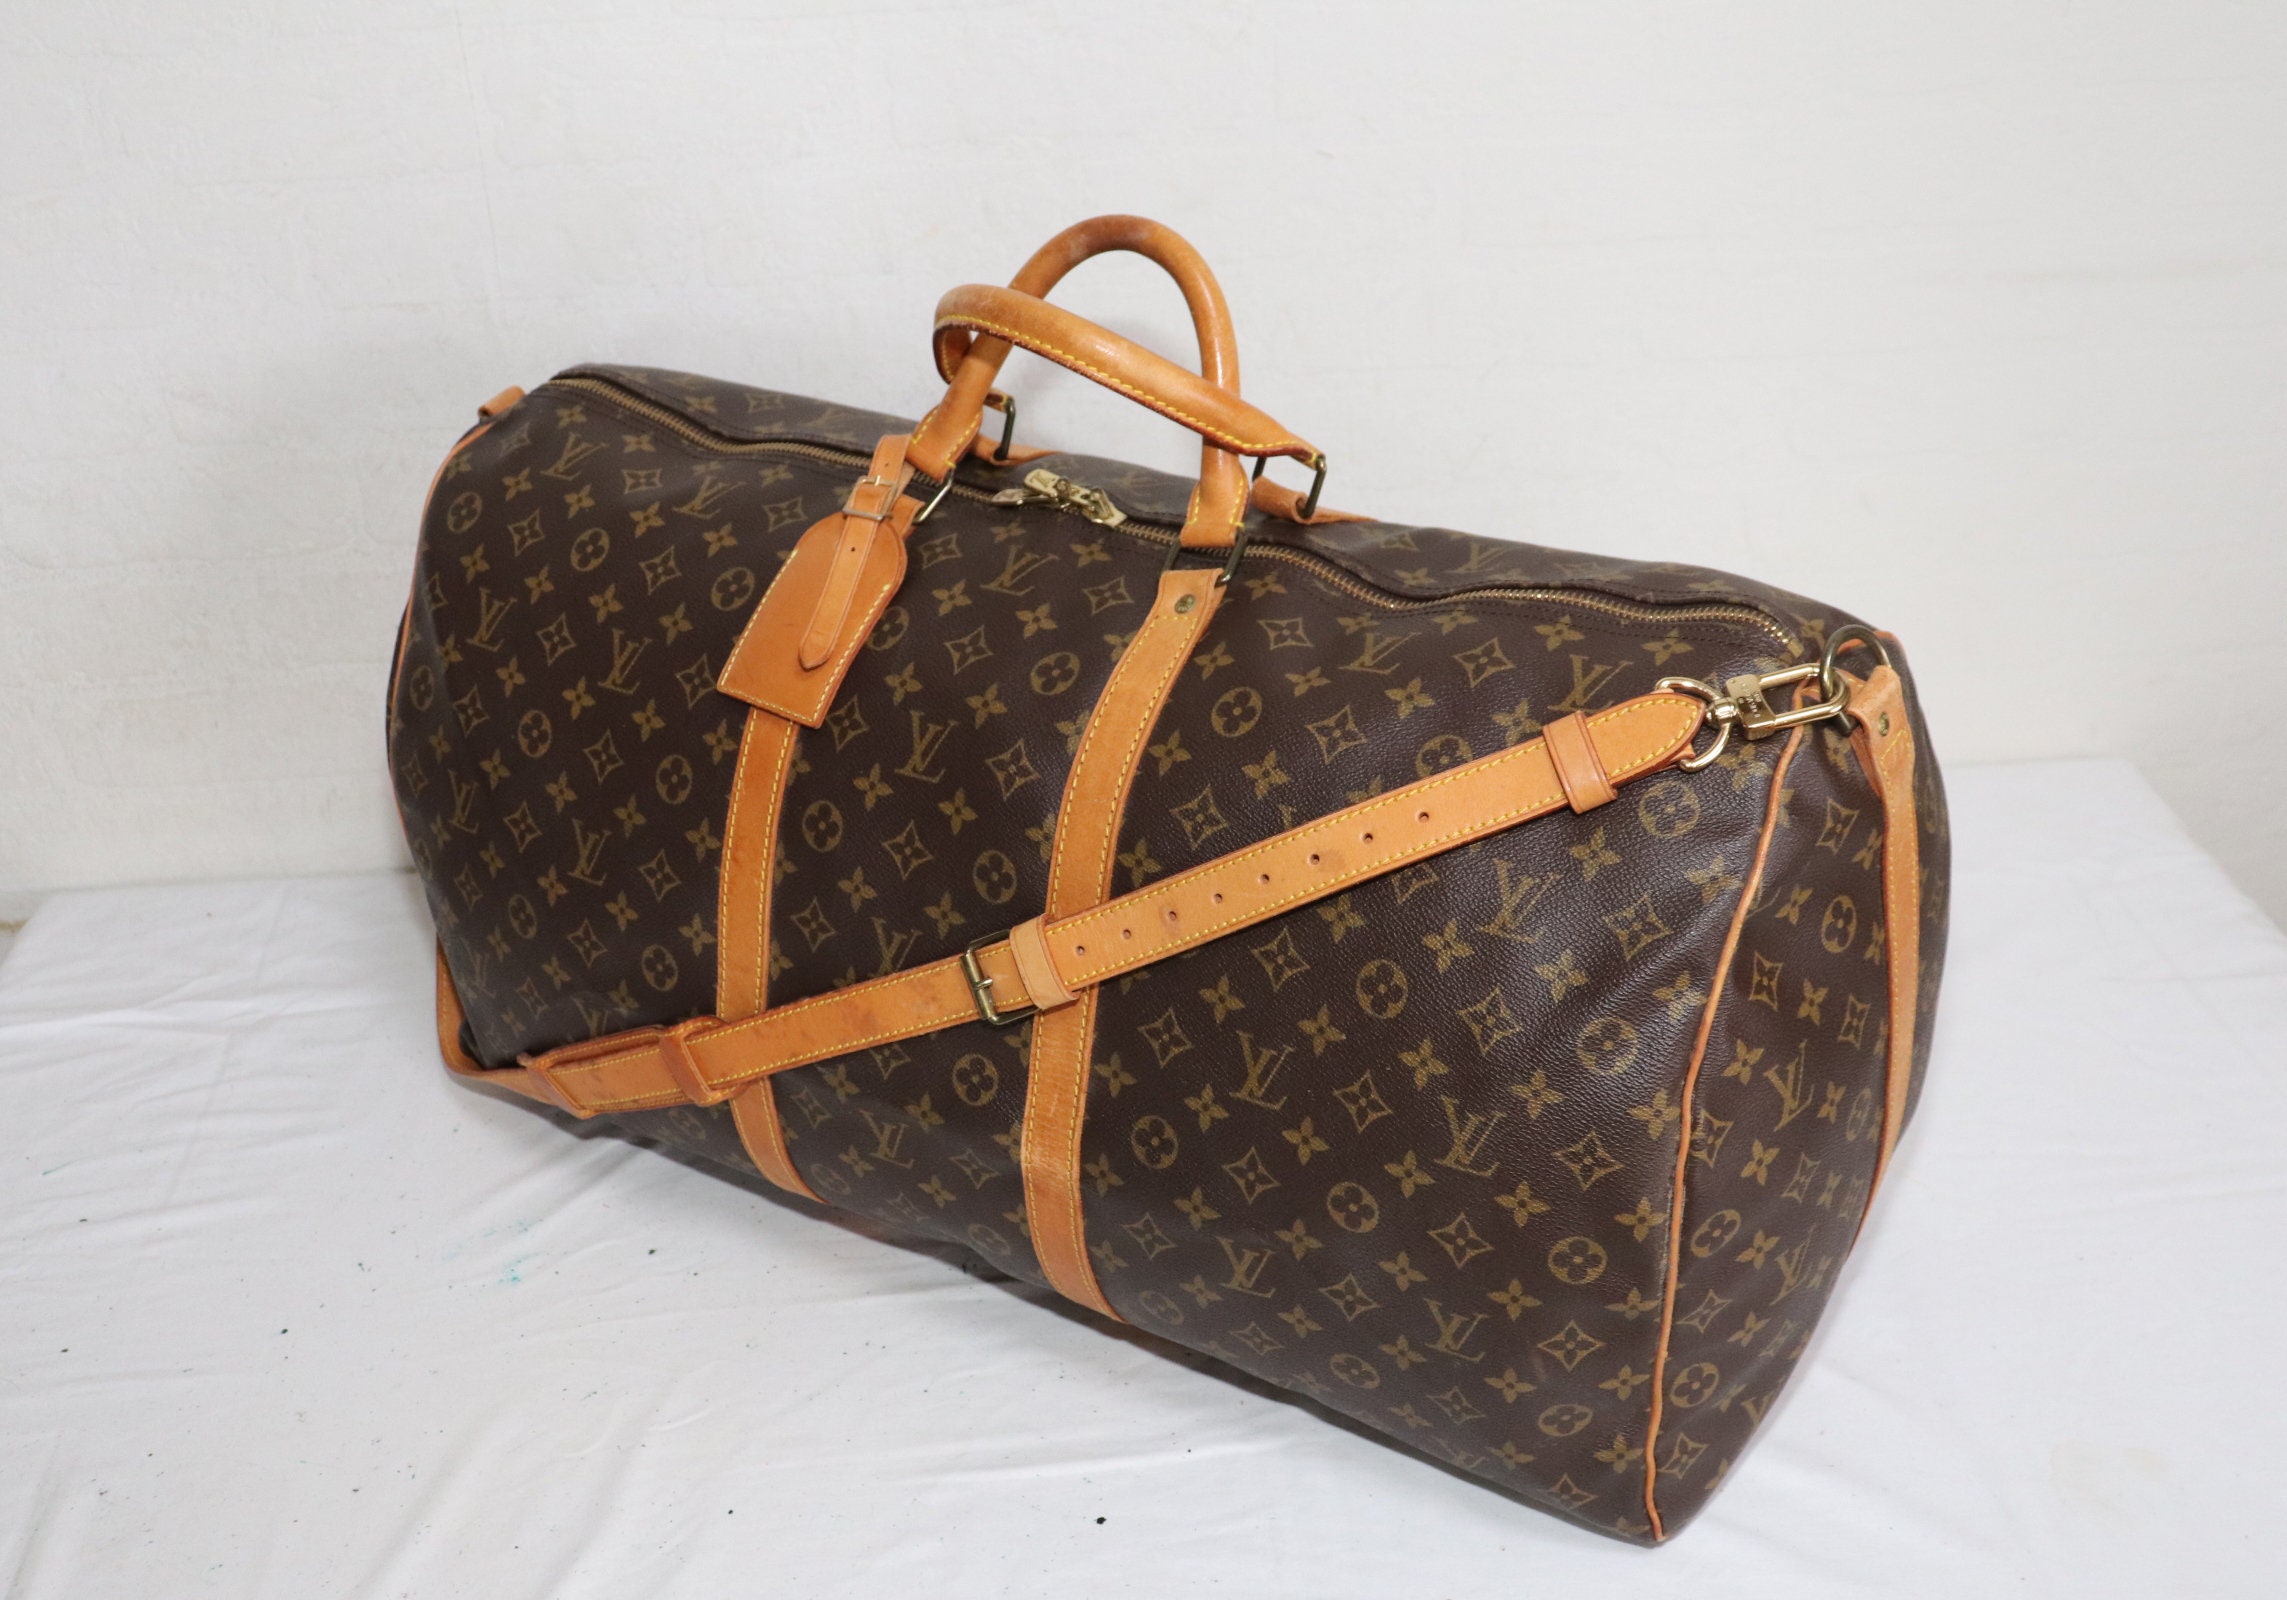 Shop for Louis Vuitton Red Epi Leather Keepall 55 cm Duffle Bag